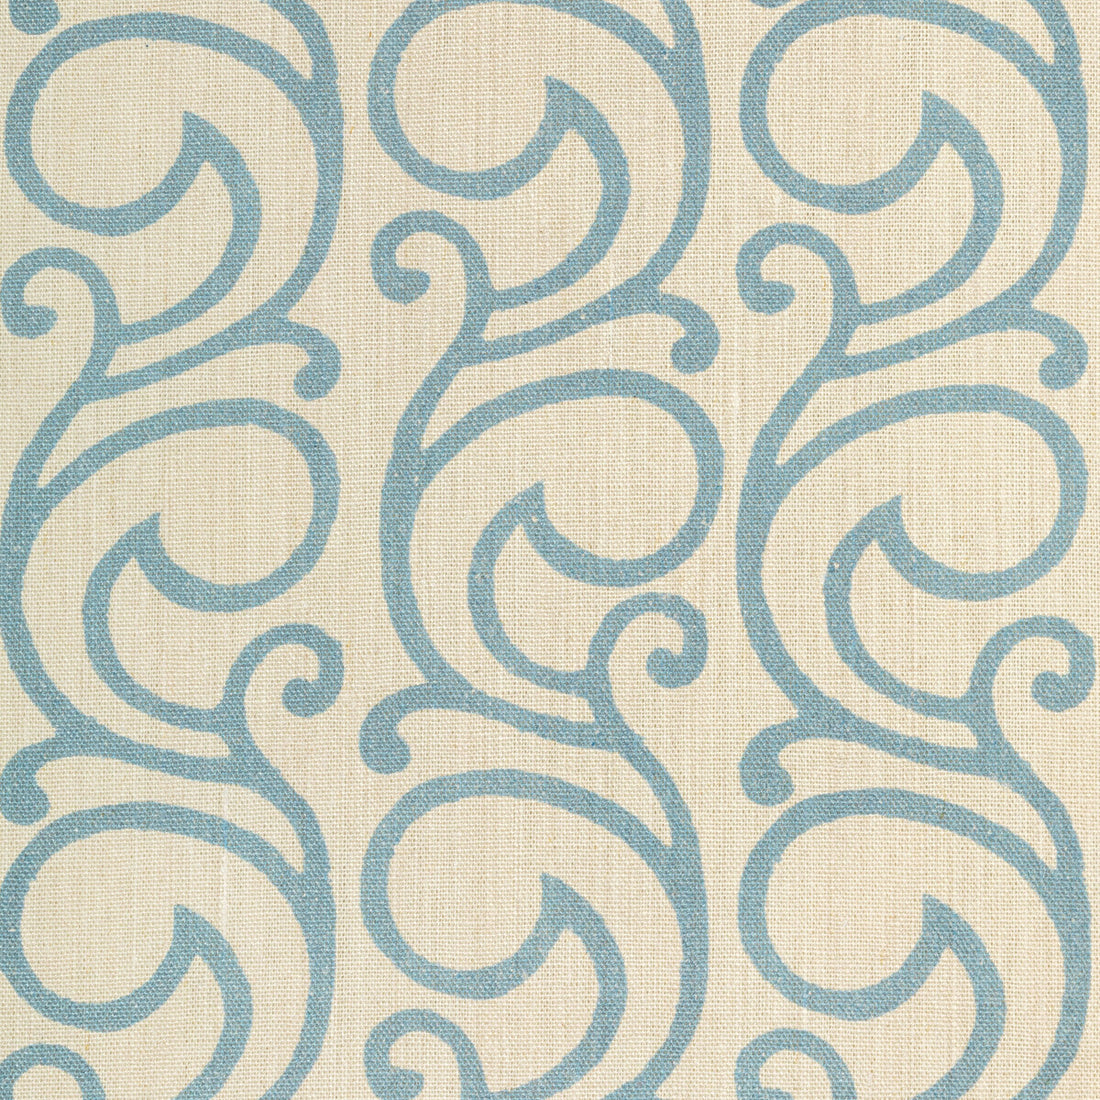 Serendipity Scroll fabric in dew color - pattern 2022103.15.0 - by Lee Jofa in the Sarah Bartholomew collection